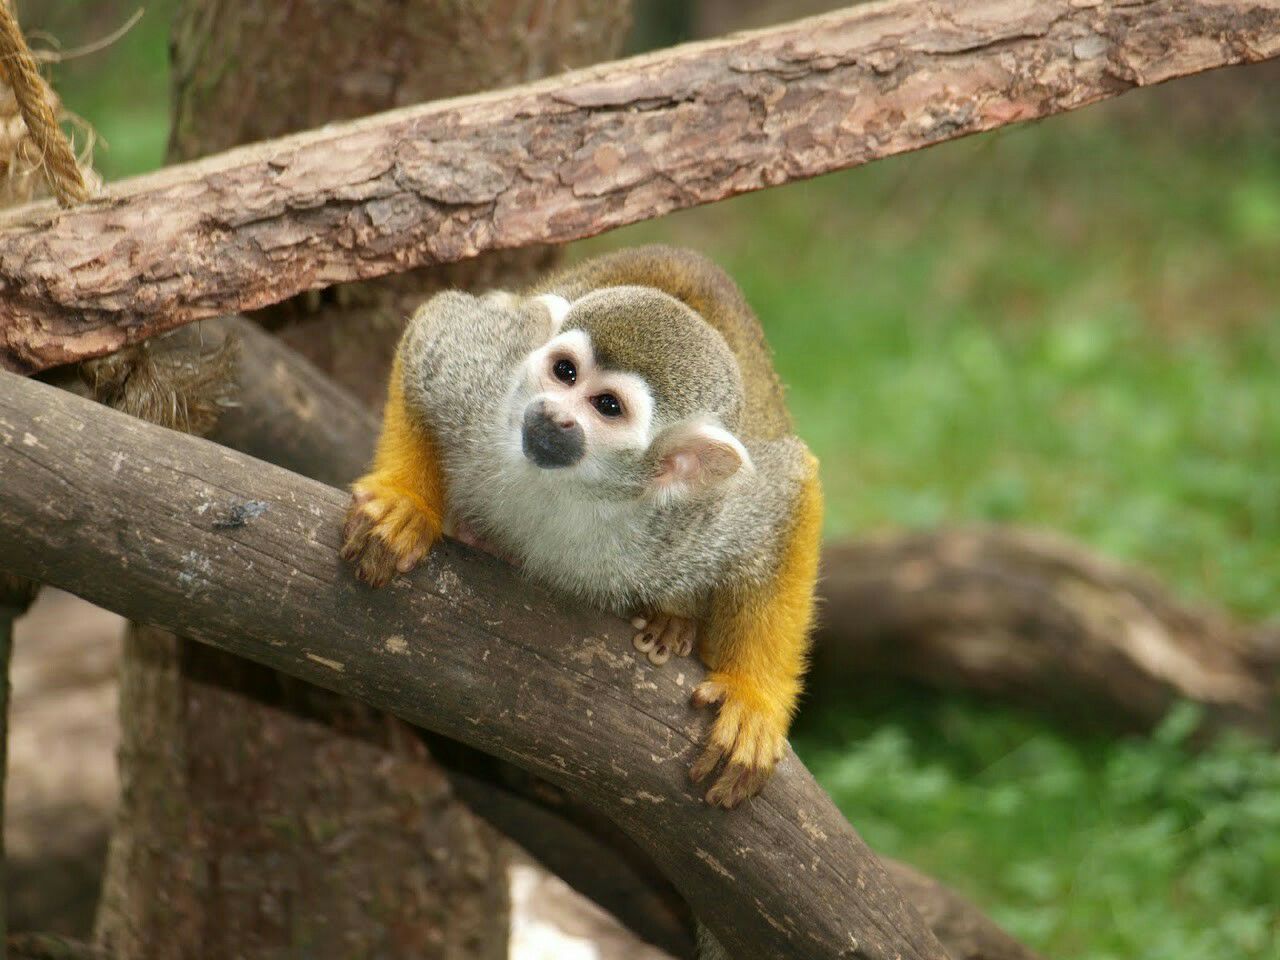 Close-up of squirrel monkey on tree